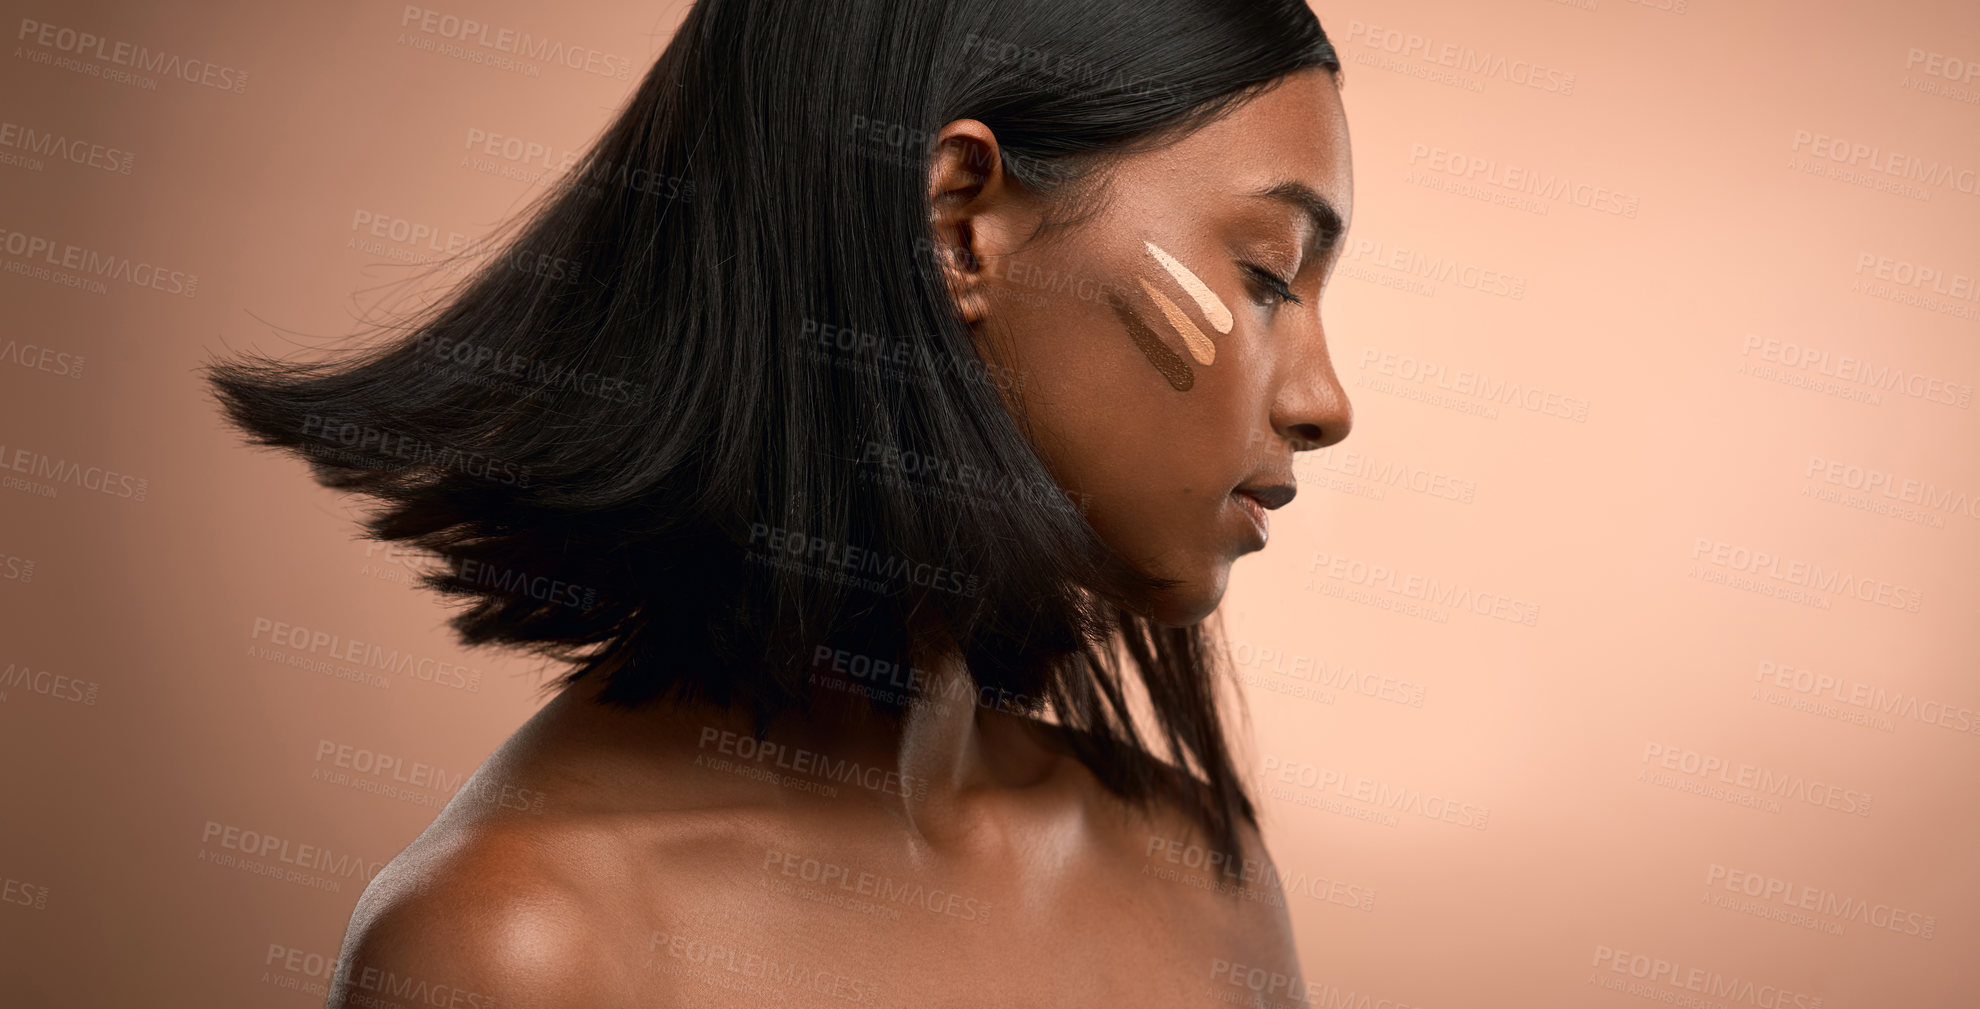 Buy stock photo Shot of an attractive young woman applying foundation to her face against a brown background